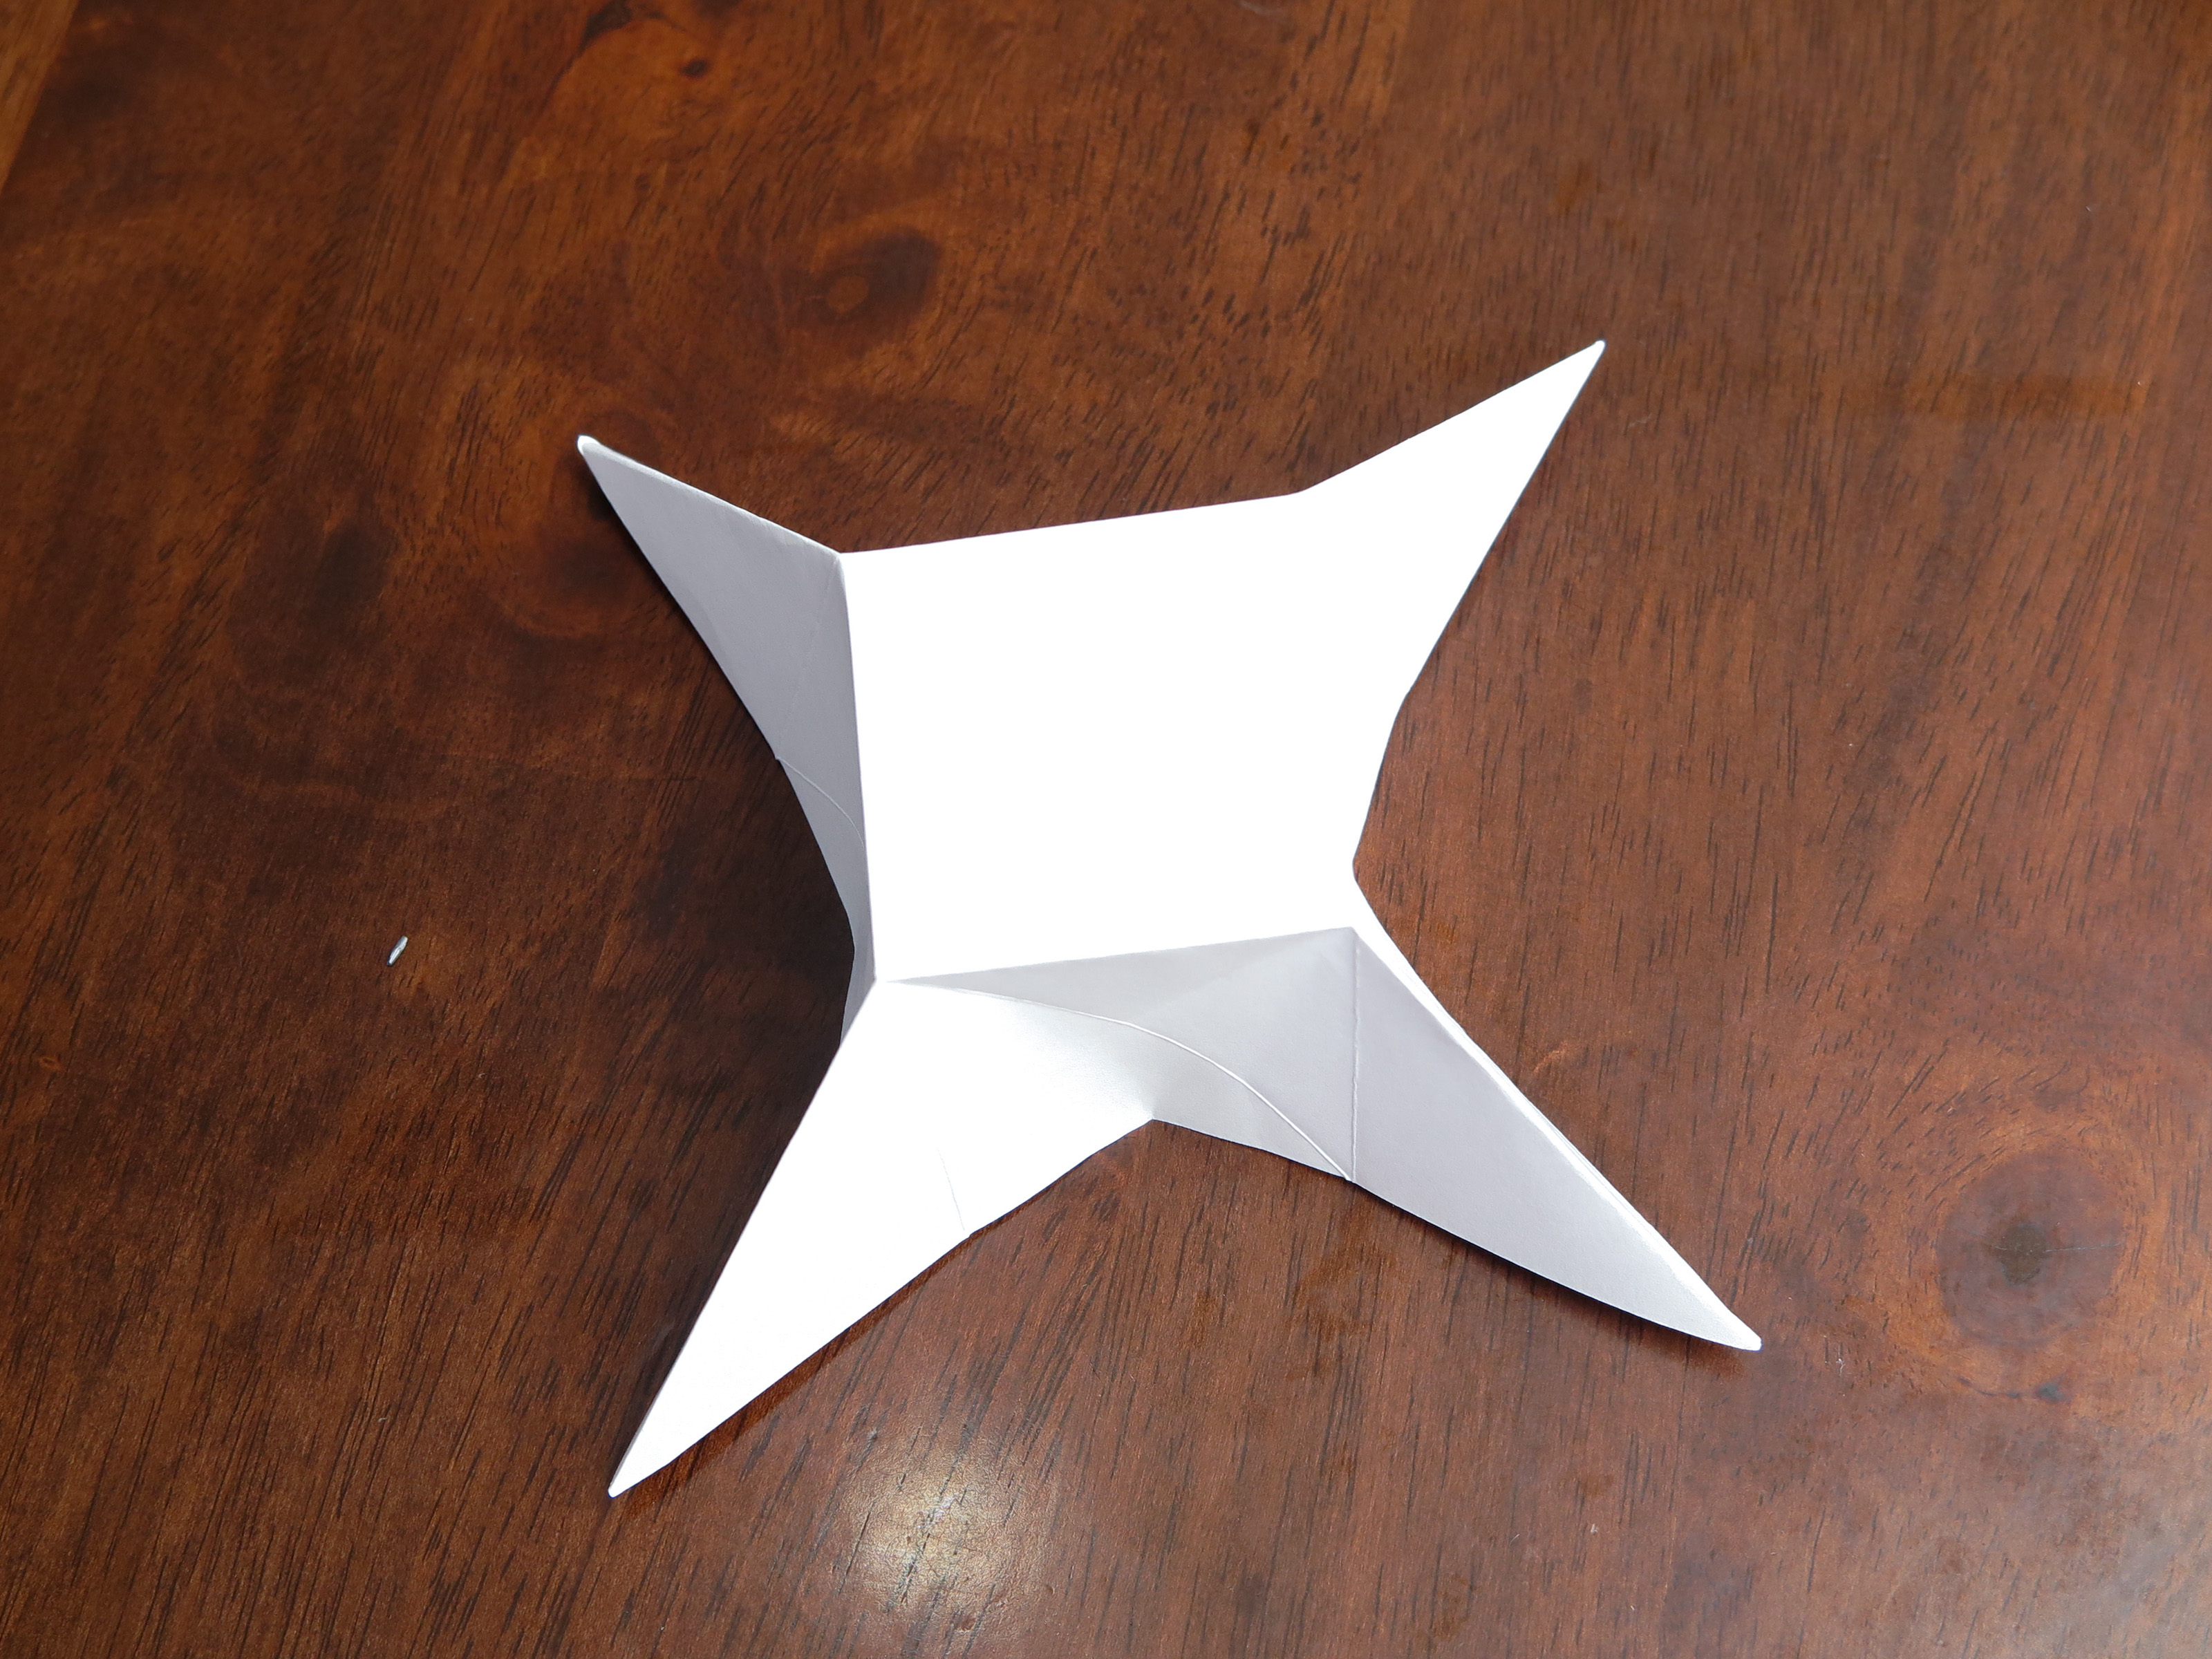 How To Make 3D Star Origami How To Make An Origami Star With Pictures Wikihow